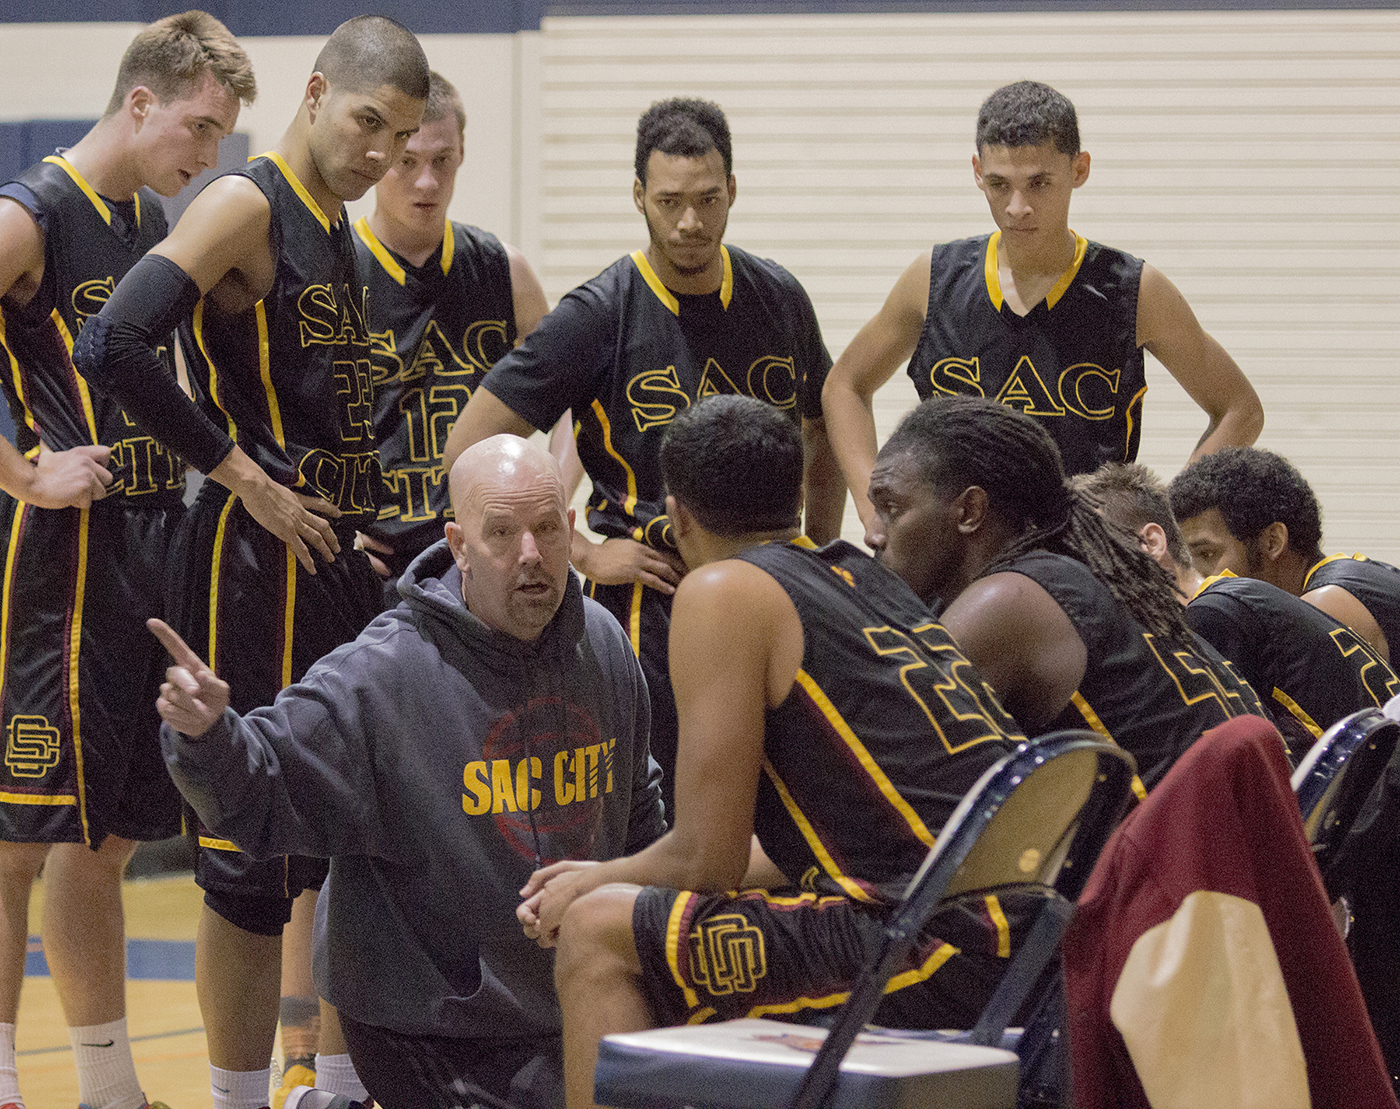 City College head coach Andrew Jones talks to his team during a timeout in the first half of the game against Feather River College Dec. 3. Photo by Kristopher Hooks | khooksexpress@gmail.com